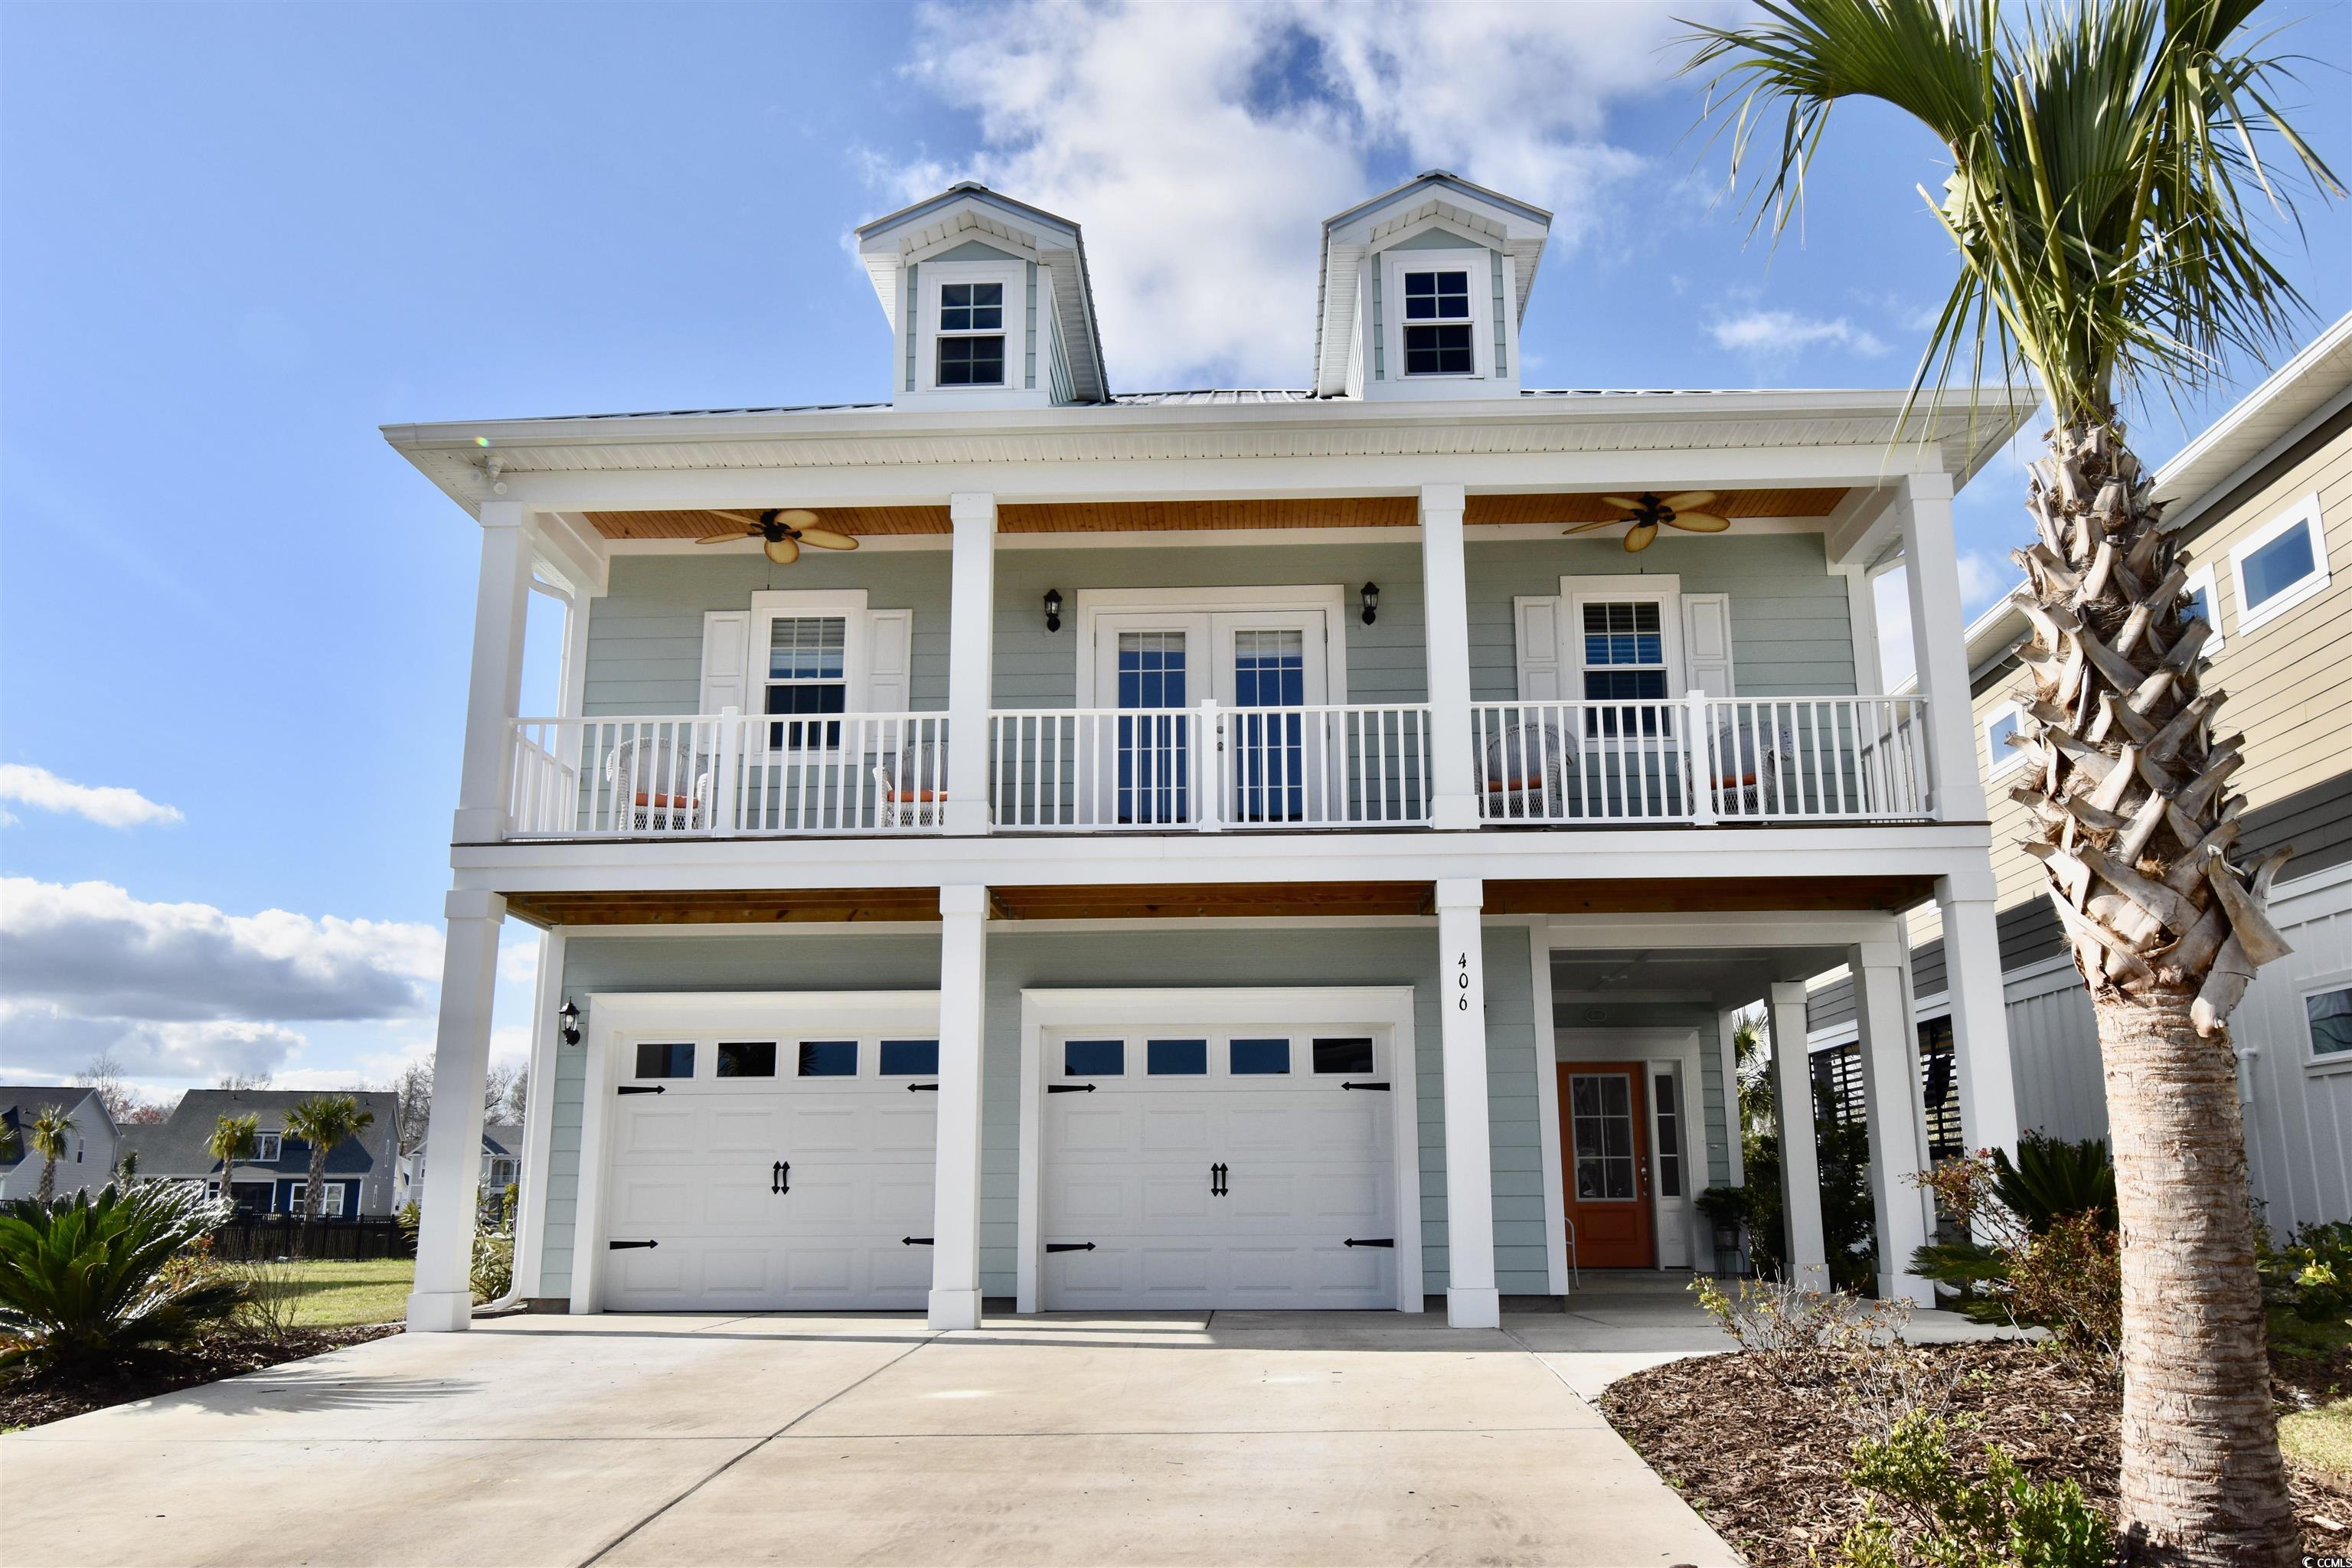 welcome to your dream home nestled in boardwalk at the waterway, an enchanting community situated along the intracoastal waterway in myrtle beach. this charming 3-bedroom, 2 1/2-bathroom home boasts a unique reverse floor plan and offers fountain views from the back yard.     the reverse floor plan places the living spaces on the upper level, allowing for sweeping views of the intracoastal waterway from the front porch. imagine sipping your morning coffee or enjoying evening sunsets with this breathtaking backdrop.this level boasts an open-concept layout that seamlessly connects the family room, dining area, and kitchen. the well-appointed kitchen is a chef's delight, featuring stainless steel appliances, ample cabinetry, granite countertops, pantry and a convenient breakfast bar for casual dining. retreat to the spacious primary bedroom which features a versatile sitting area that could effortlessly transform into a nursery, home office, or exercise room.   this room also encompasses a en-suite bathroom with dual sinks, a soaking tub, a separate shower with glass enclosure, walk in closet and linen closet.  additionally, the primary bedroom offers direct access to a screened porch providing a spot to unwind. as you step downstairs, you'll find two additional bedrooms, perfect for family members or guests, along with a shared full bathroom and a versatile bonus room that can be used as a secondary family room or entertainment space. french doors lead out to the covered porch, where you can relax with a glass of sweet tea.  other highlights of this exceptional home include a convenient half bathroom and  a walk-in laundry room on the upper level and a two-car garage for parking and storage. the community residents enjoy access to a host of amenities, including a boardwalk for walking & bird/boat watching, boat ramp, day dock and gated community. plus, with myrtle beach's world-class dining, shopping, and entertainment options just minutes away, you'll have everything you need within a short distance. don't miss this opportunity to own your own piece of paradise in myrtle beach. schedule a showing today and experience living at its finest!